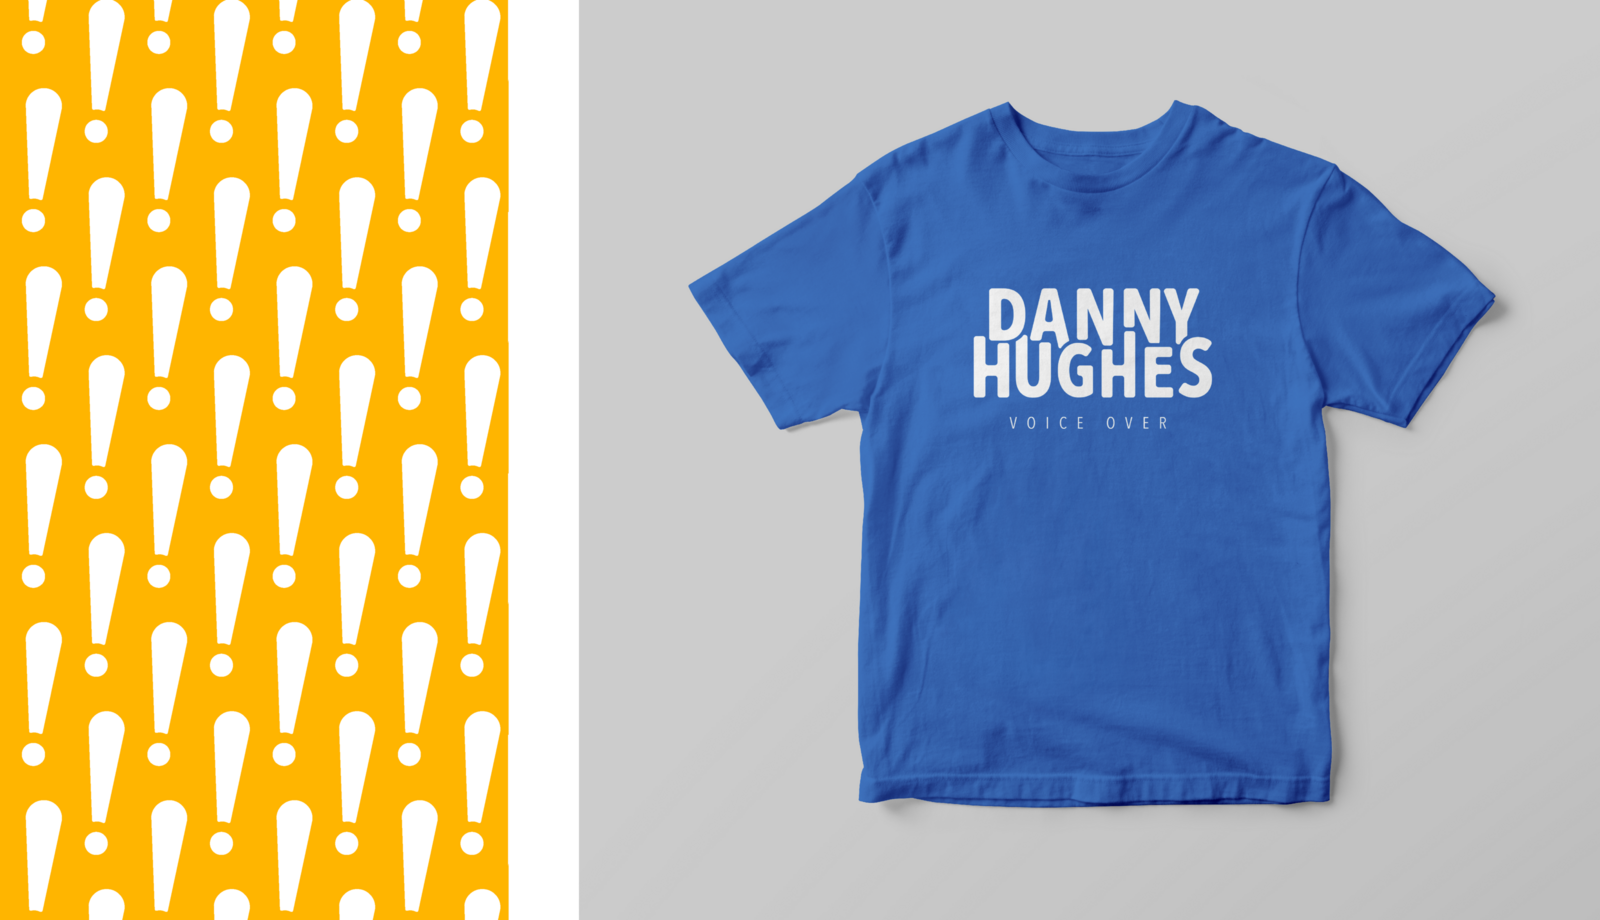 A tshirt with the Danny Hughes VO logo on it